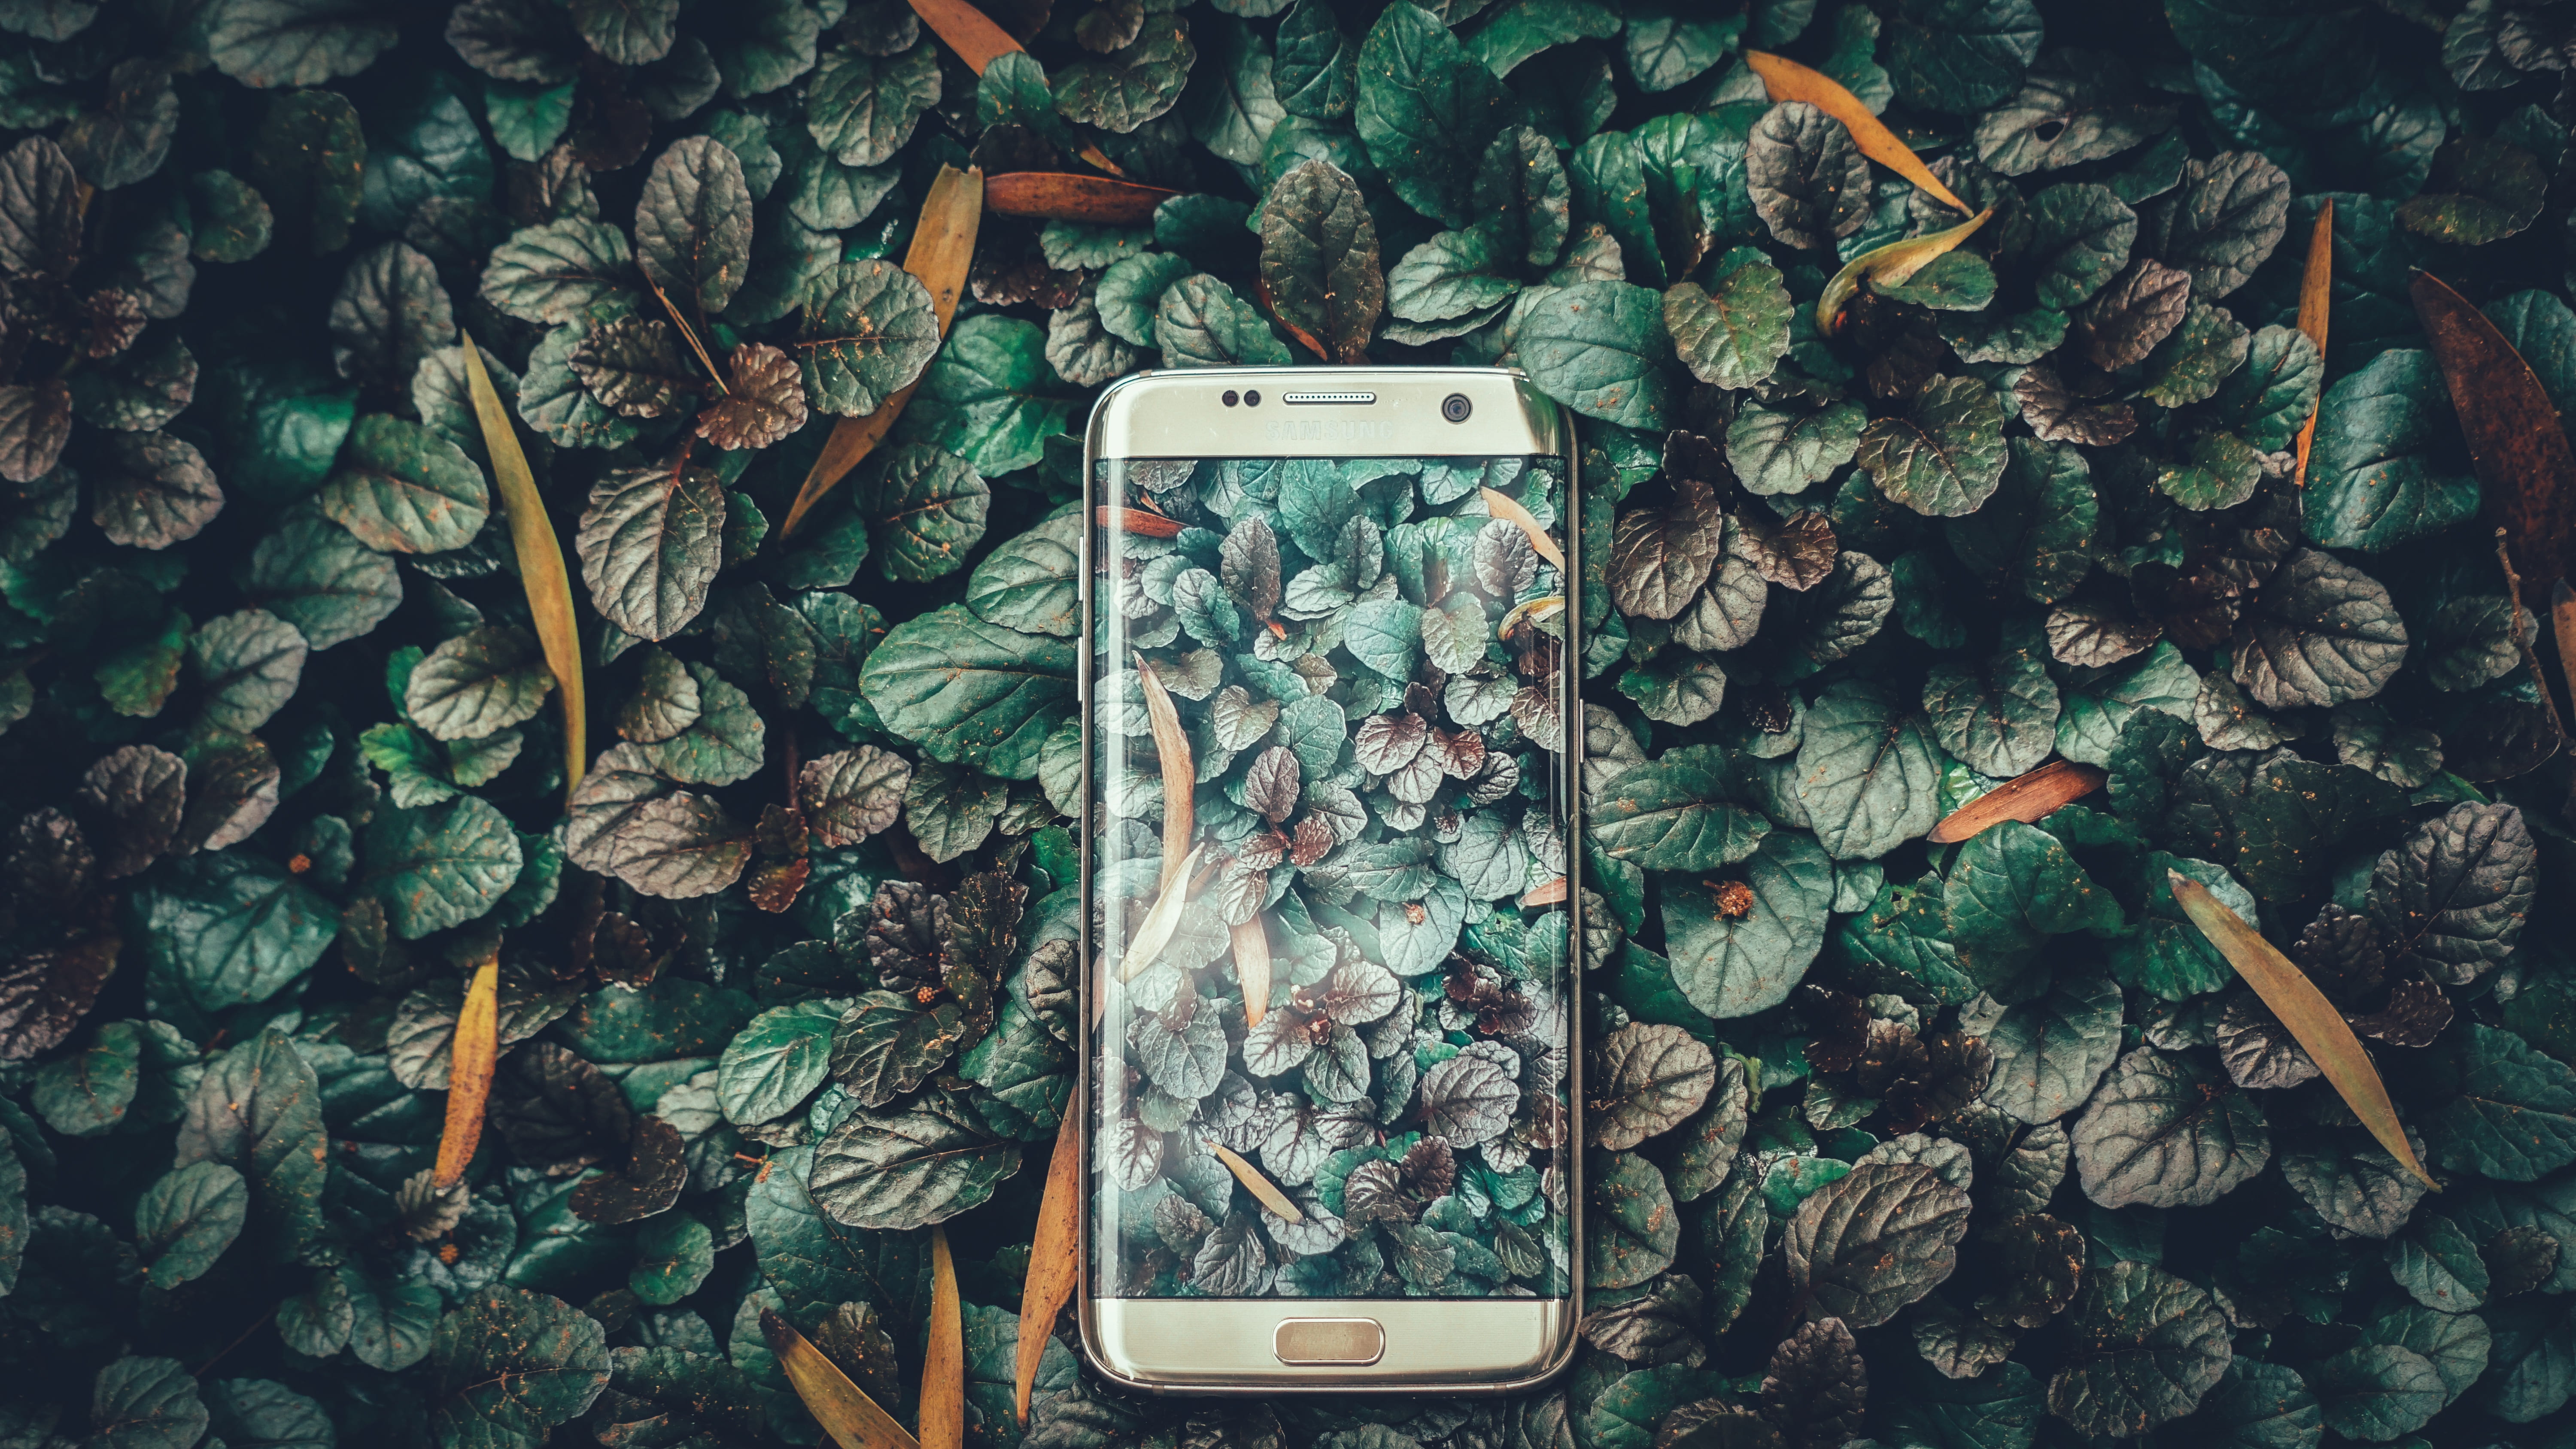 Mobile landscape, low-light photo of gold platinum Samsung Galaxy S7 edge with floral wallpaper and background